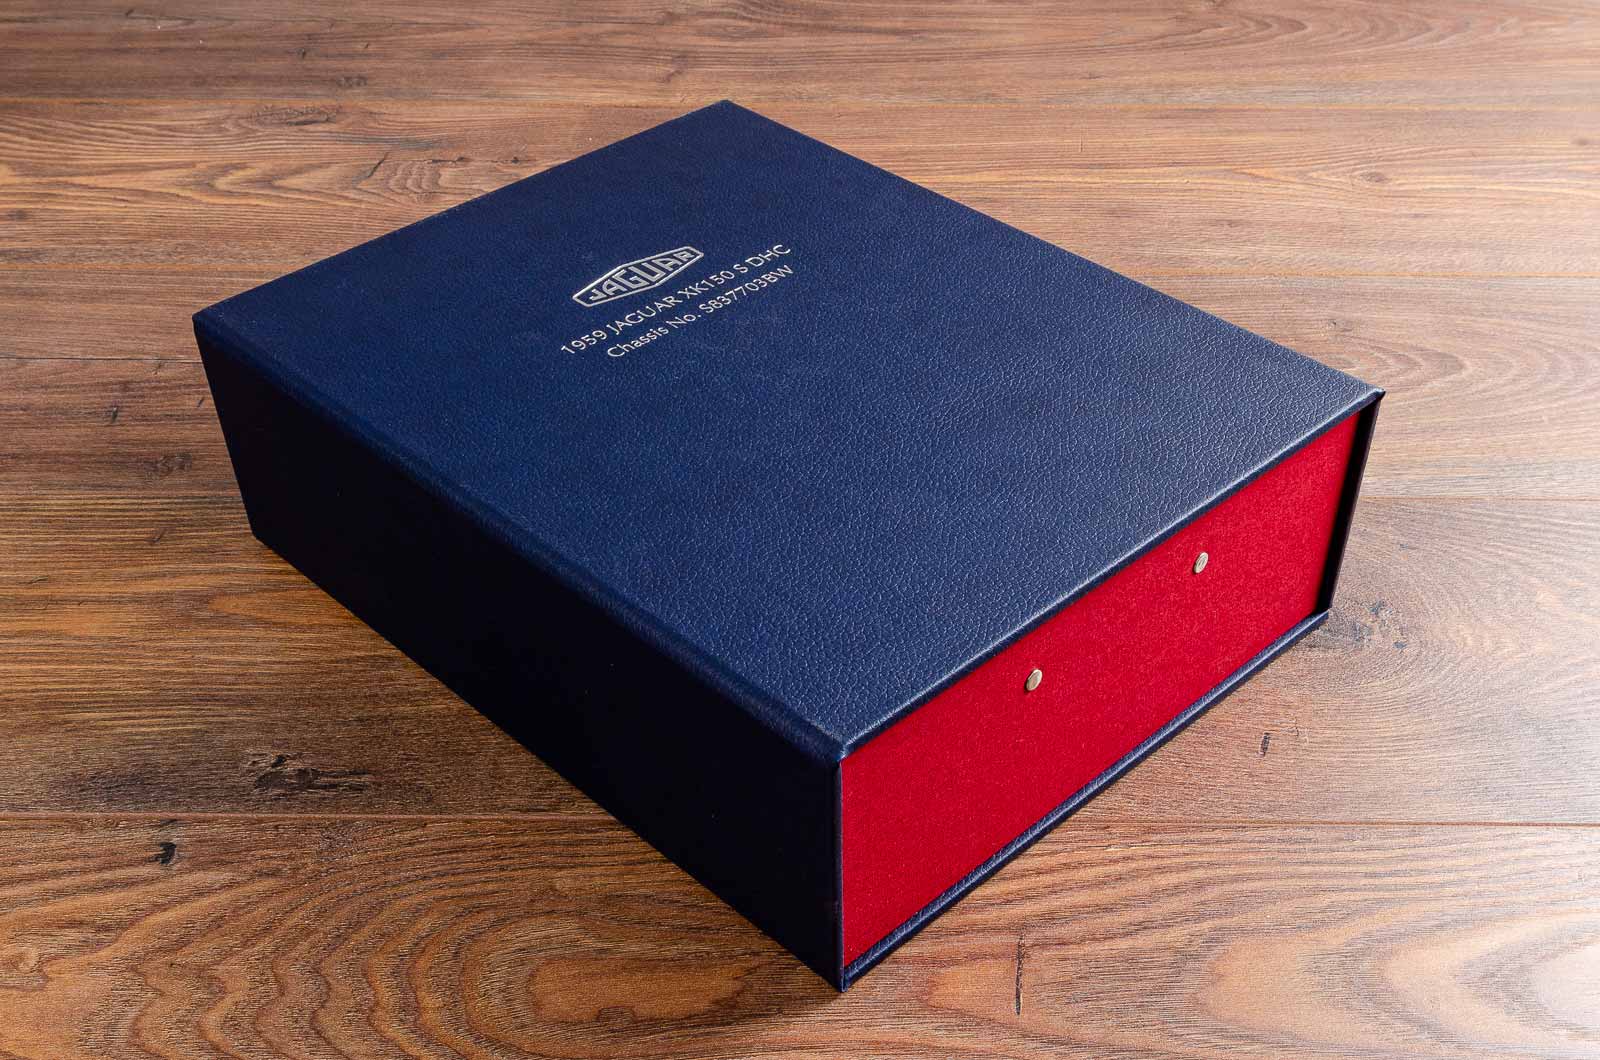 Blue faux leather and red cloth personalised box file with silver foil embossing. Made to the highest quality by hartnack and co